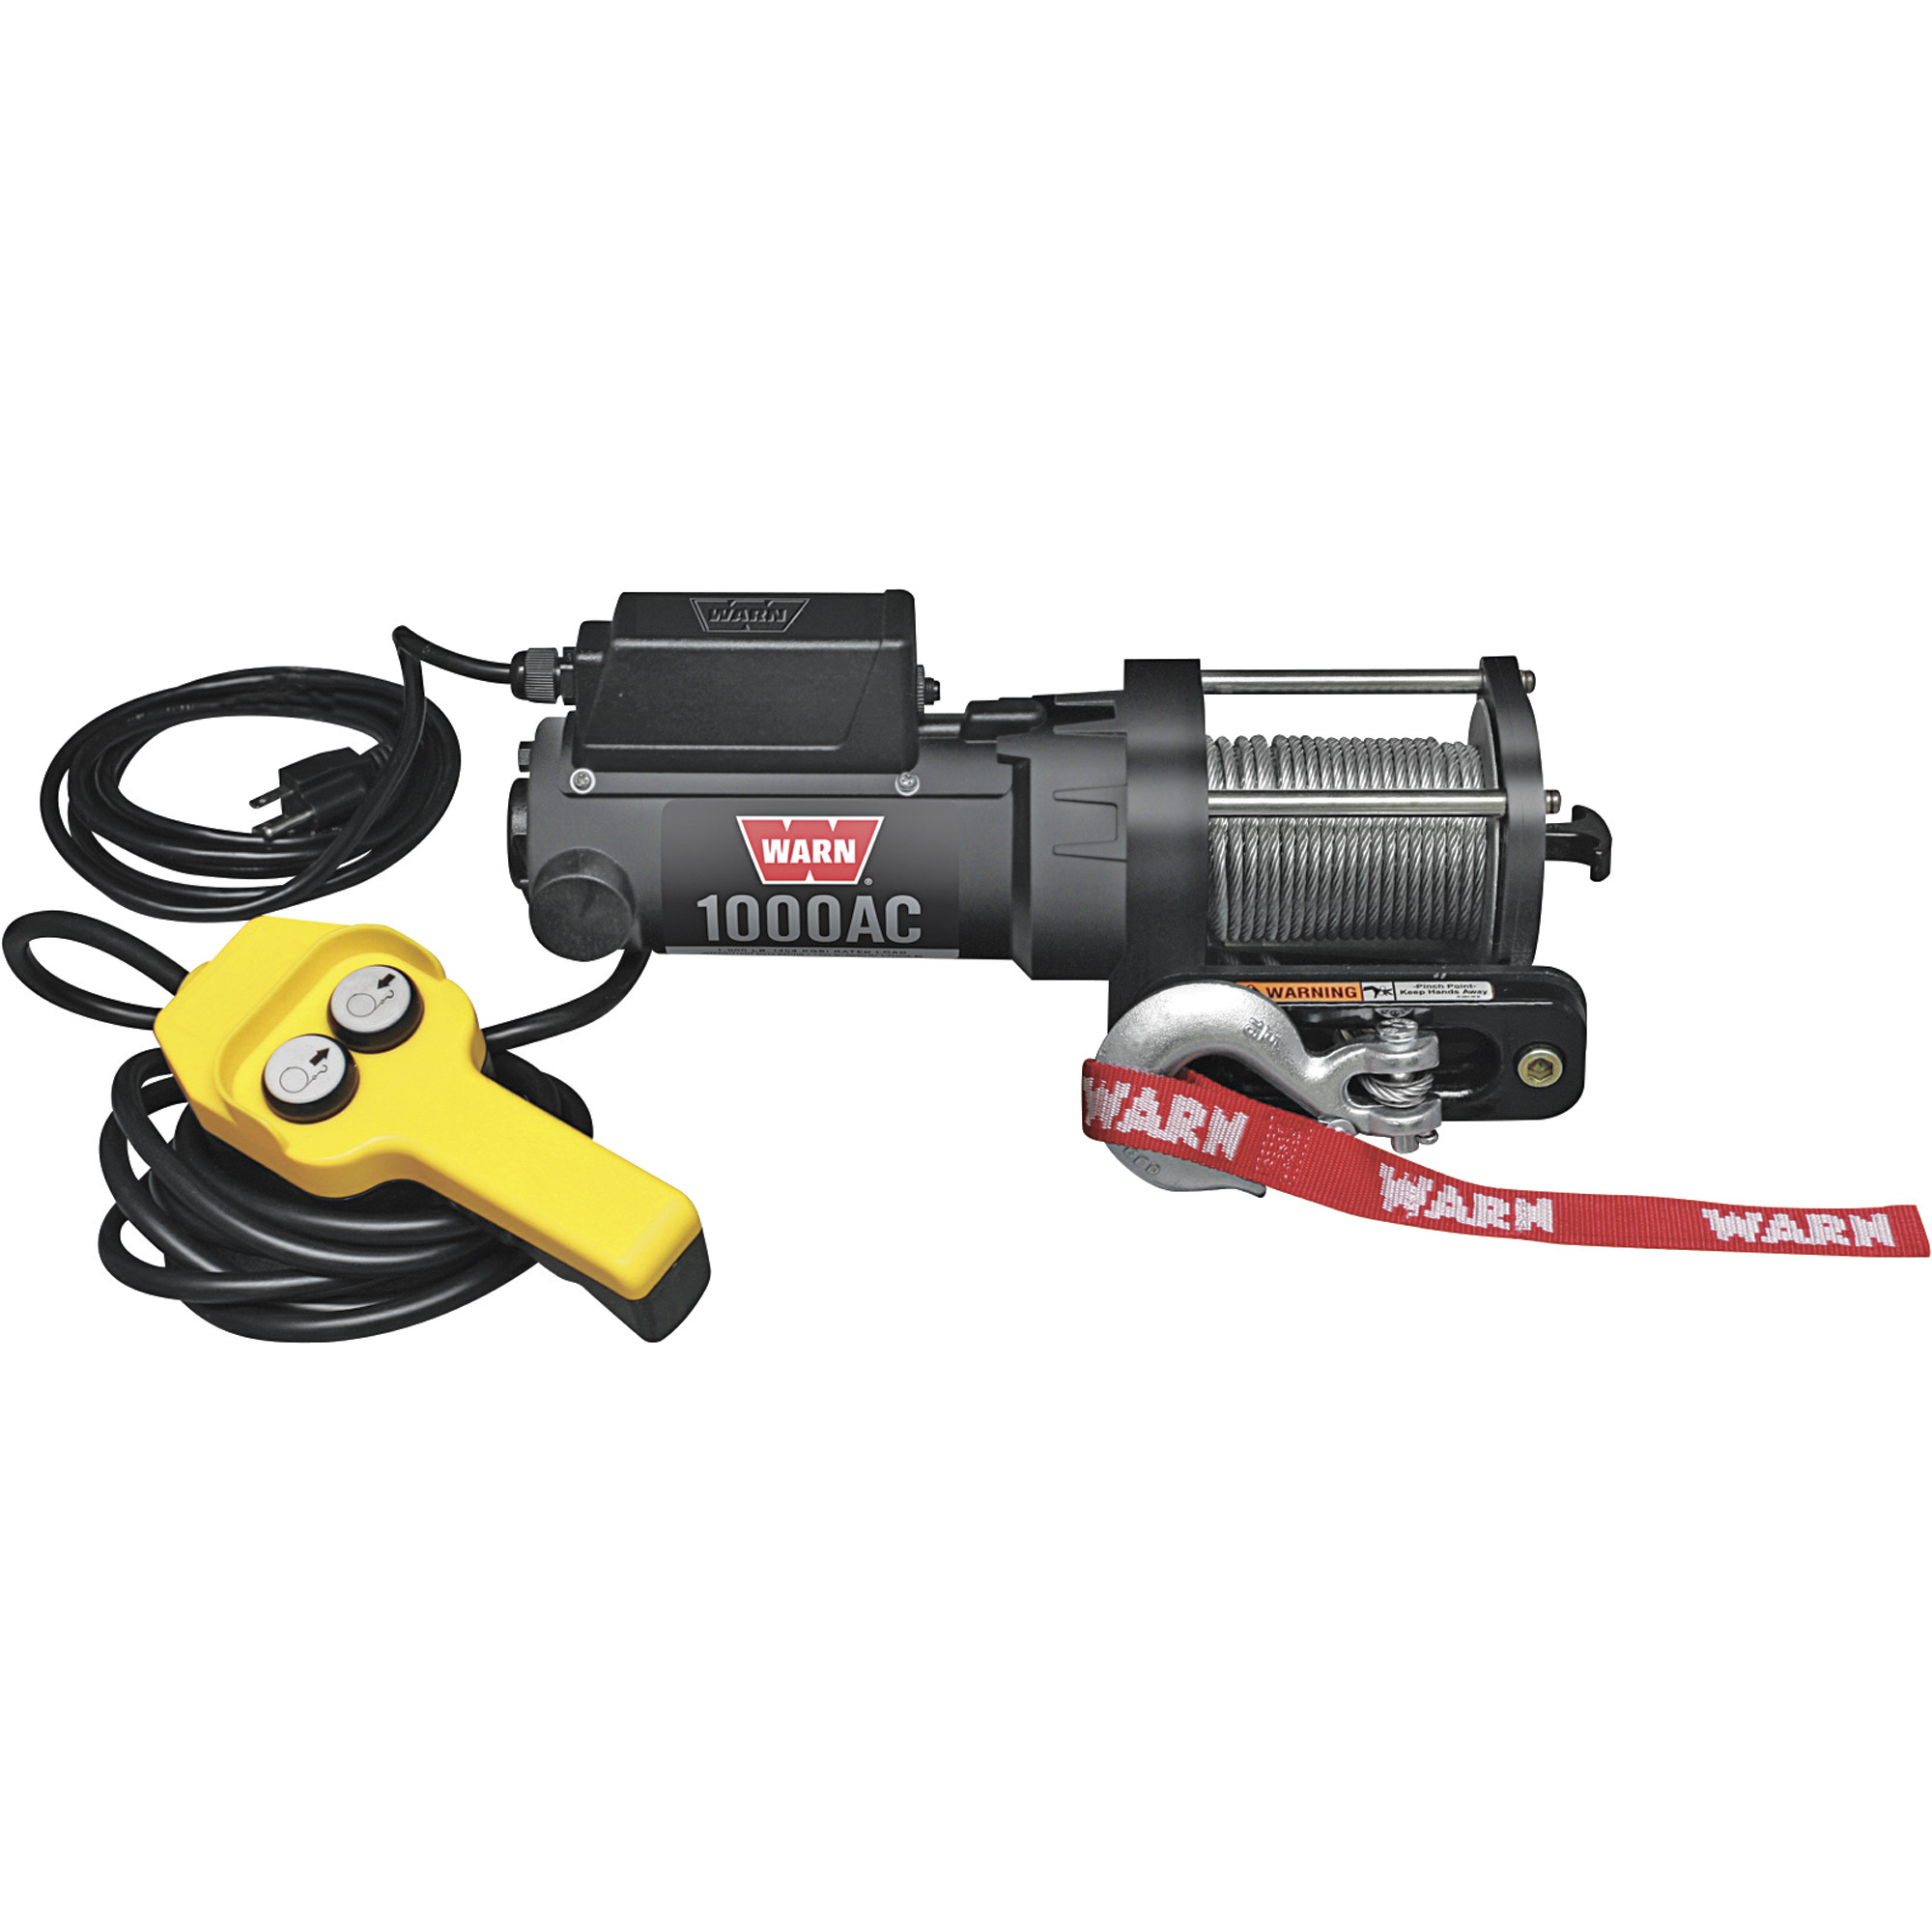 WARN 120 Volt AC Powered Electric Utility Winch, 1000-Lb. Capacity, Galvanized Steel Wire, Model 80010